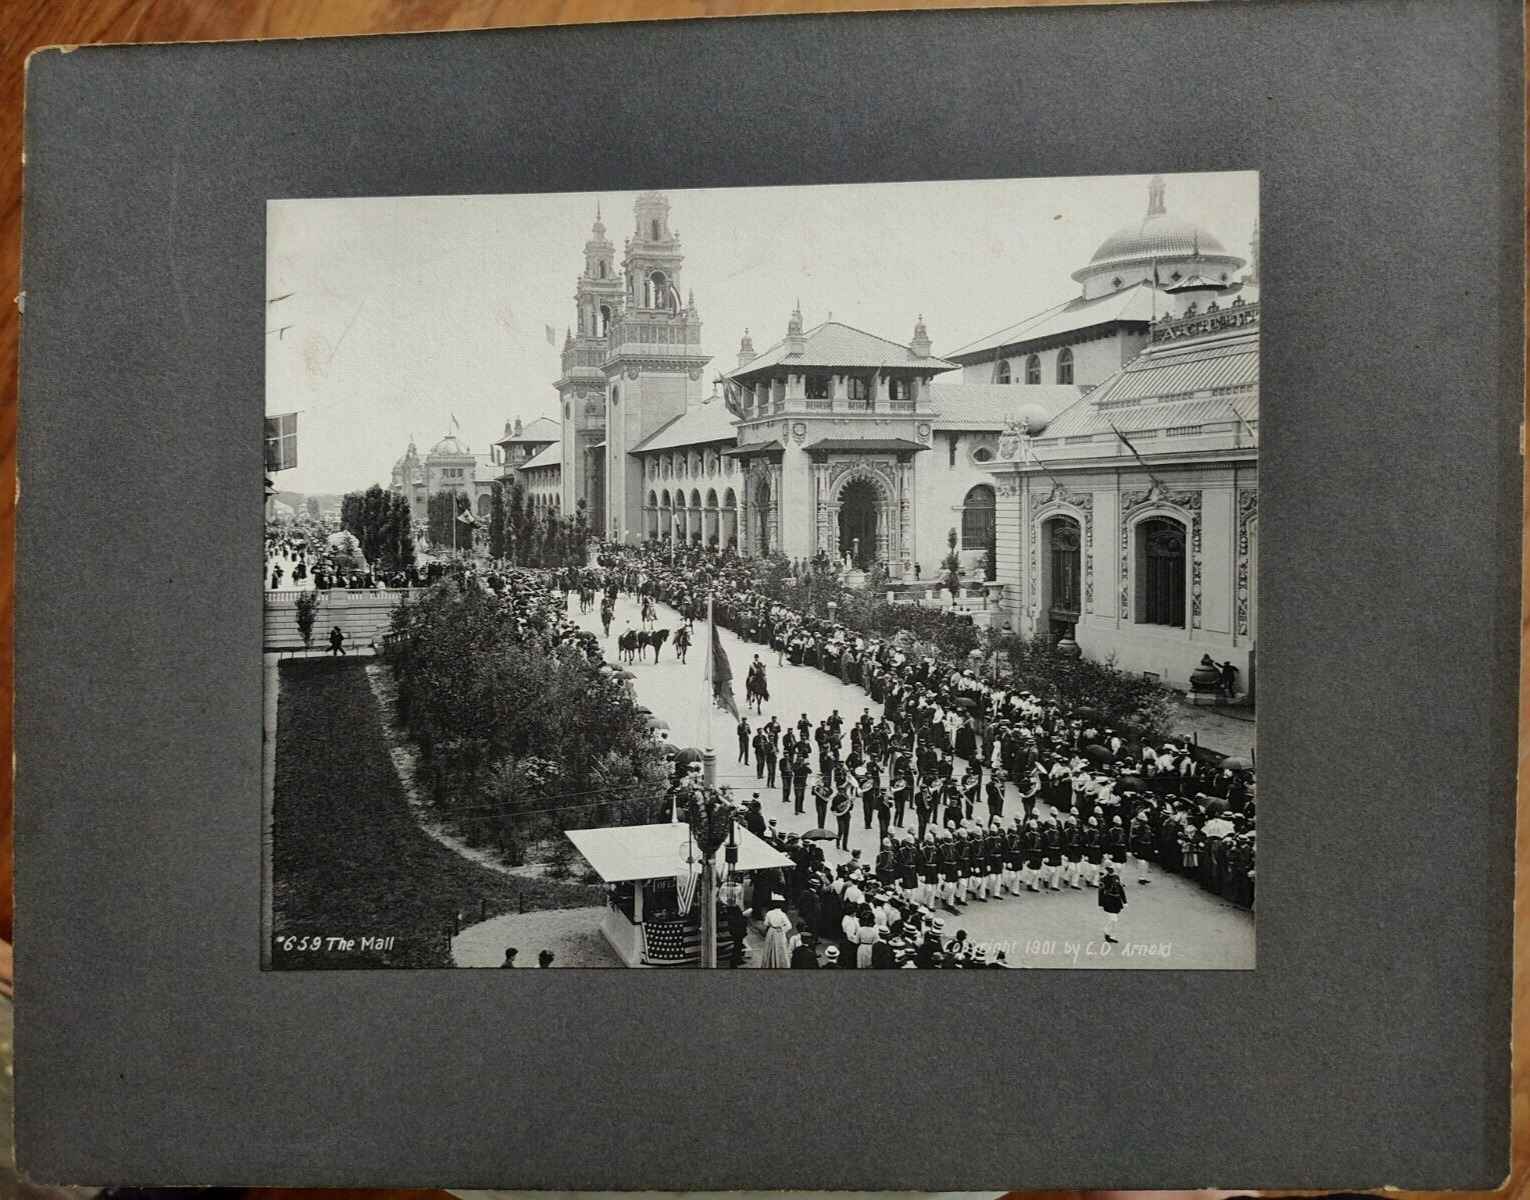 1901 Pan American Exposition 11 x 14 Photograph Parade on the Mall / C D Arnold